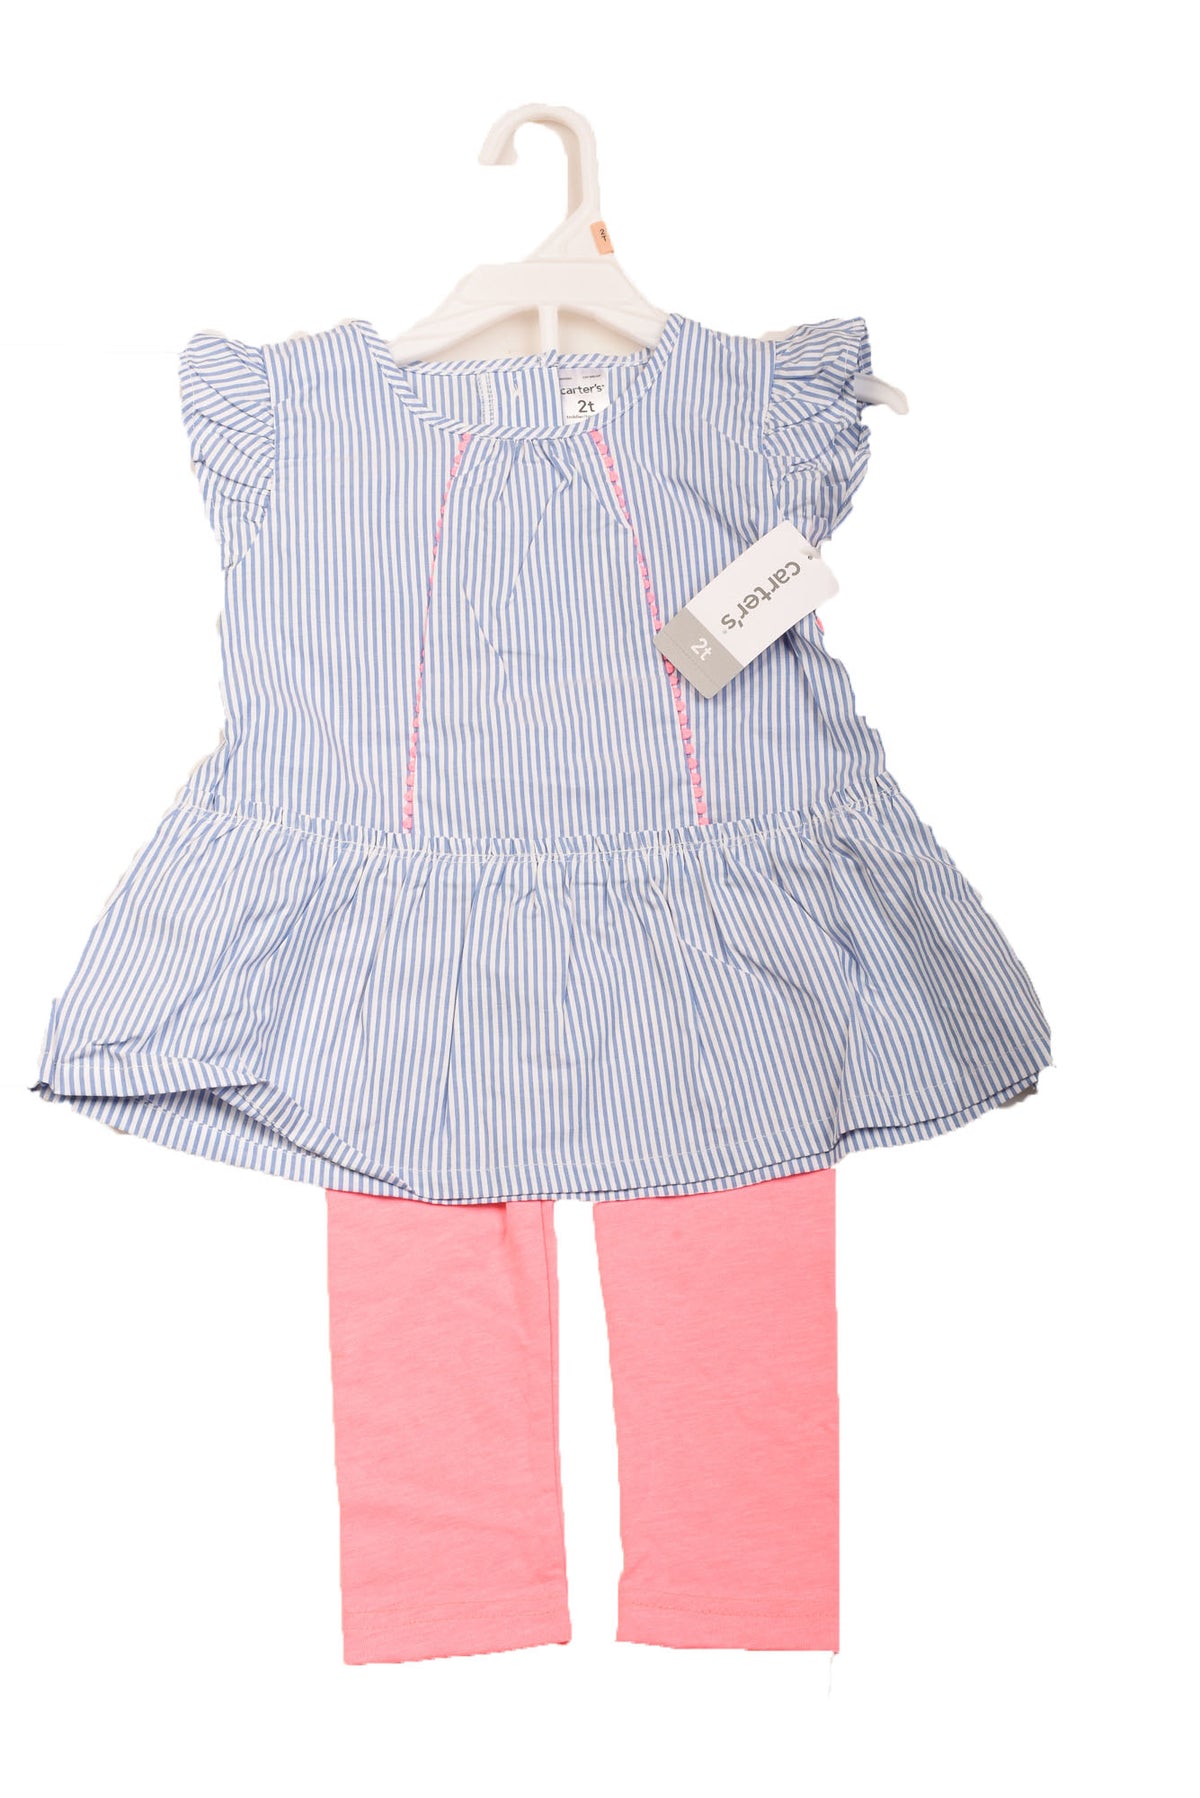 Toddler Girl&#39;s Outfit By Carter&#39;s